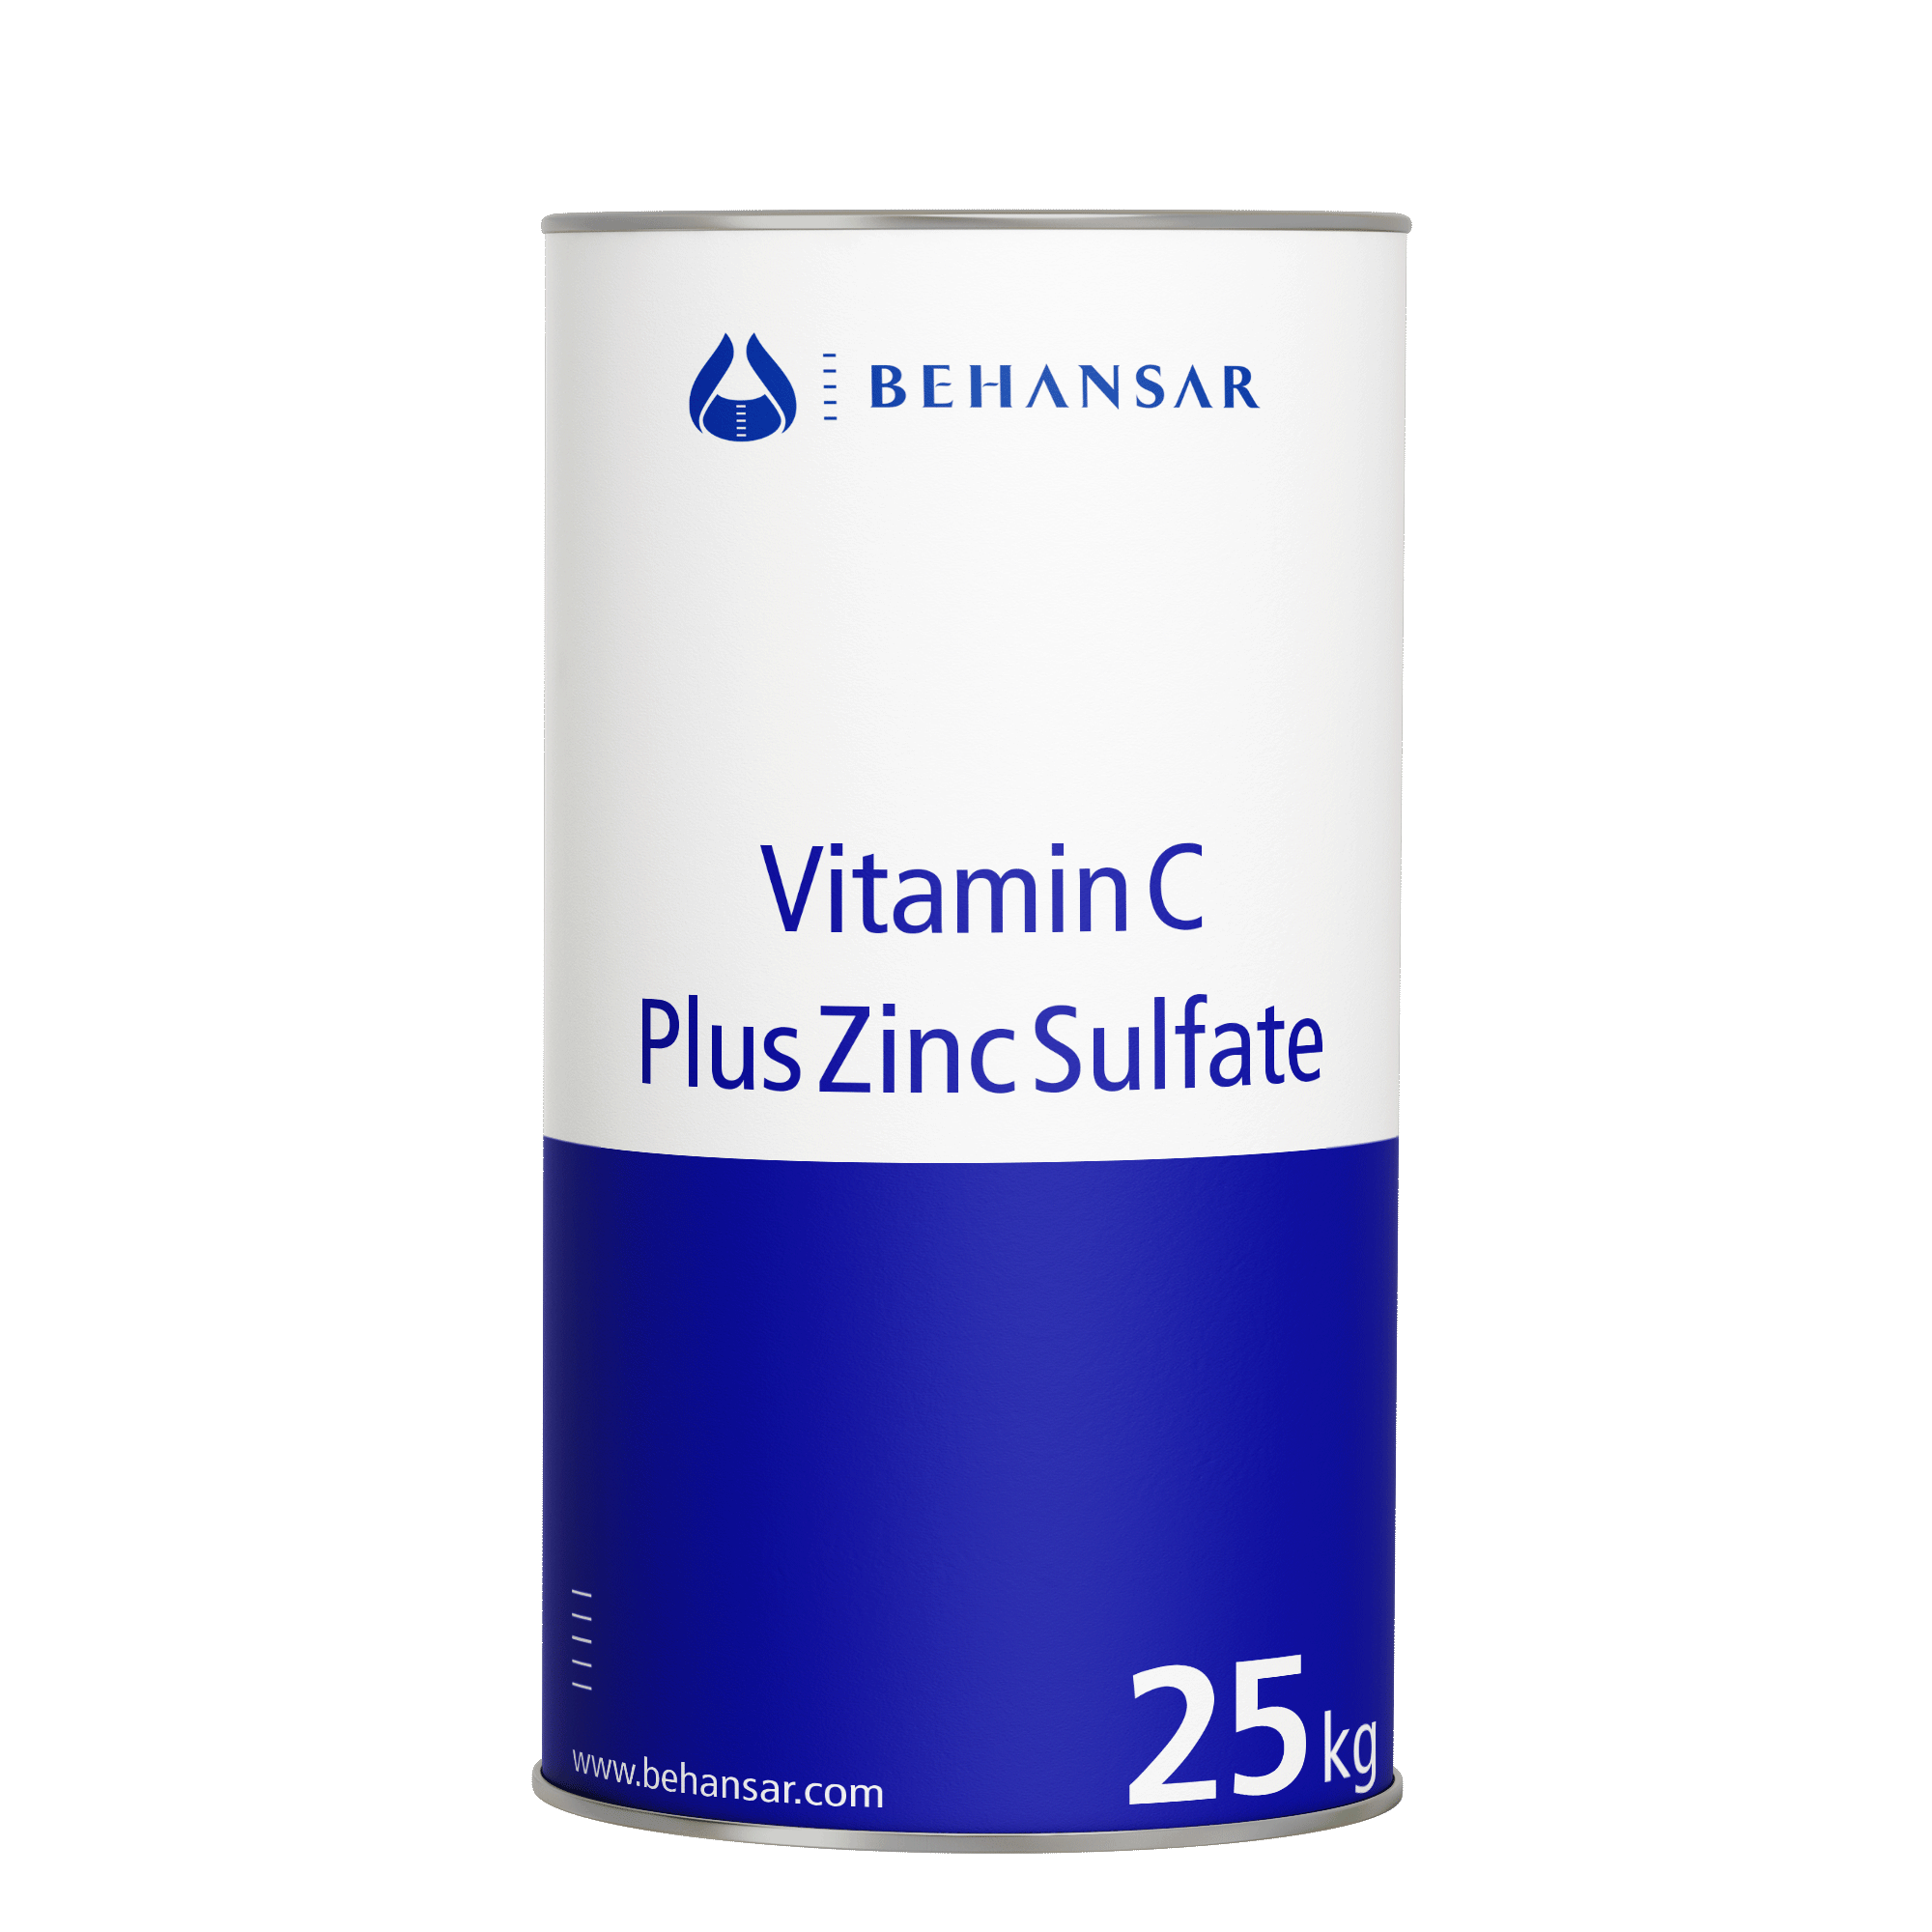 Vitamin C Plus Zinc Sulfate is one of the products of Behansar Co